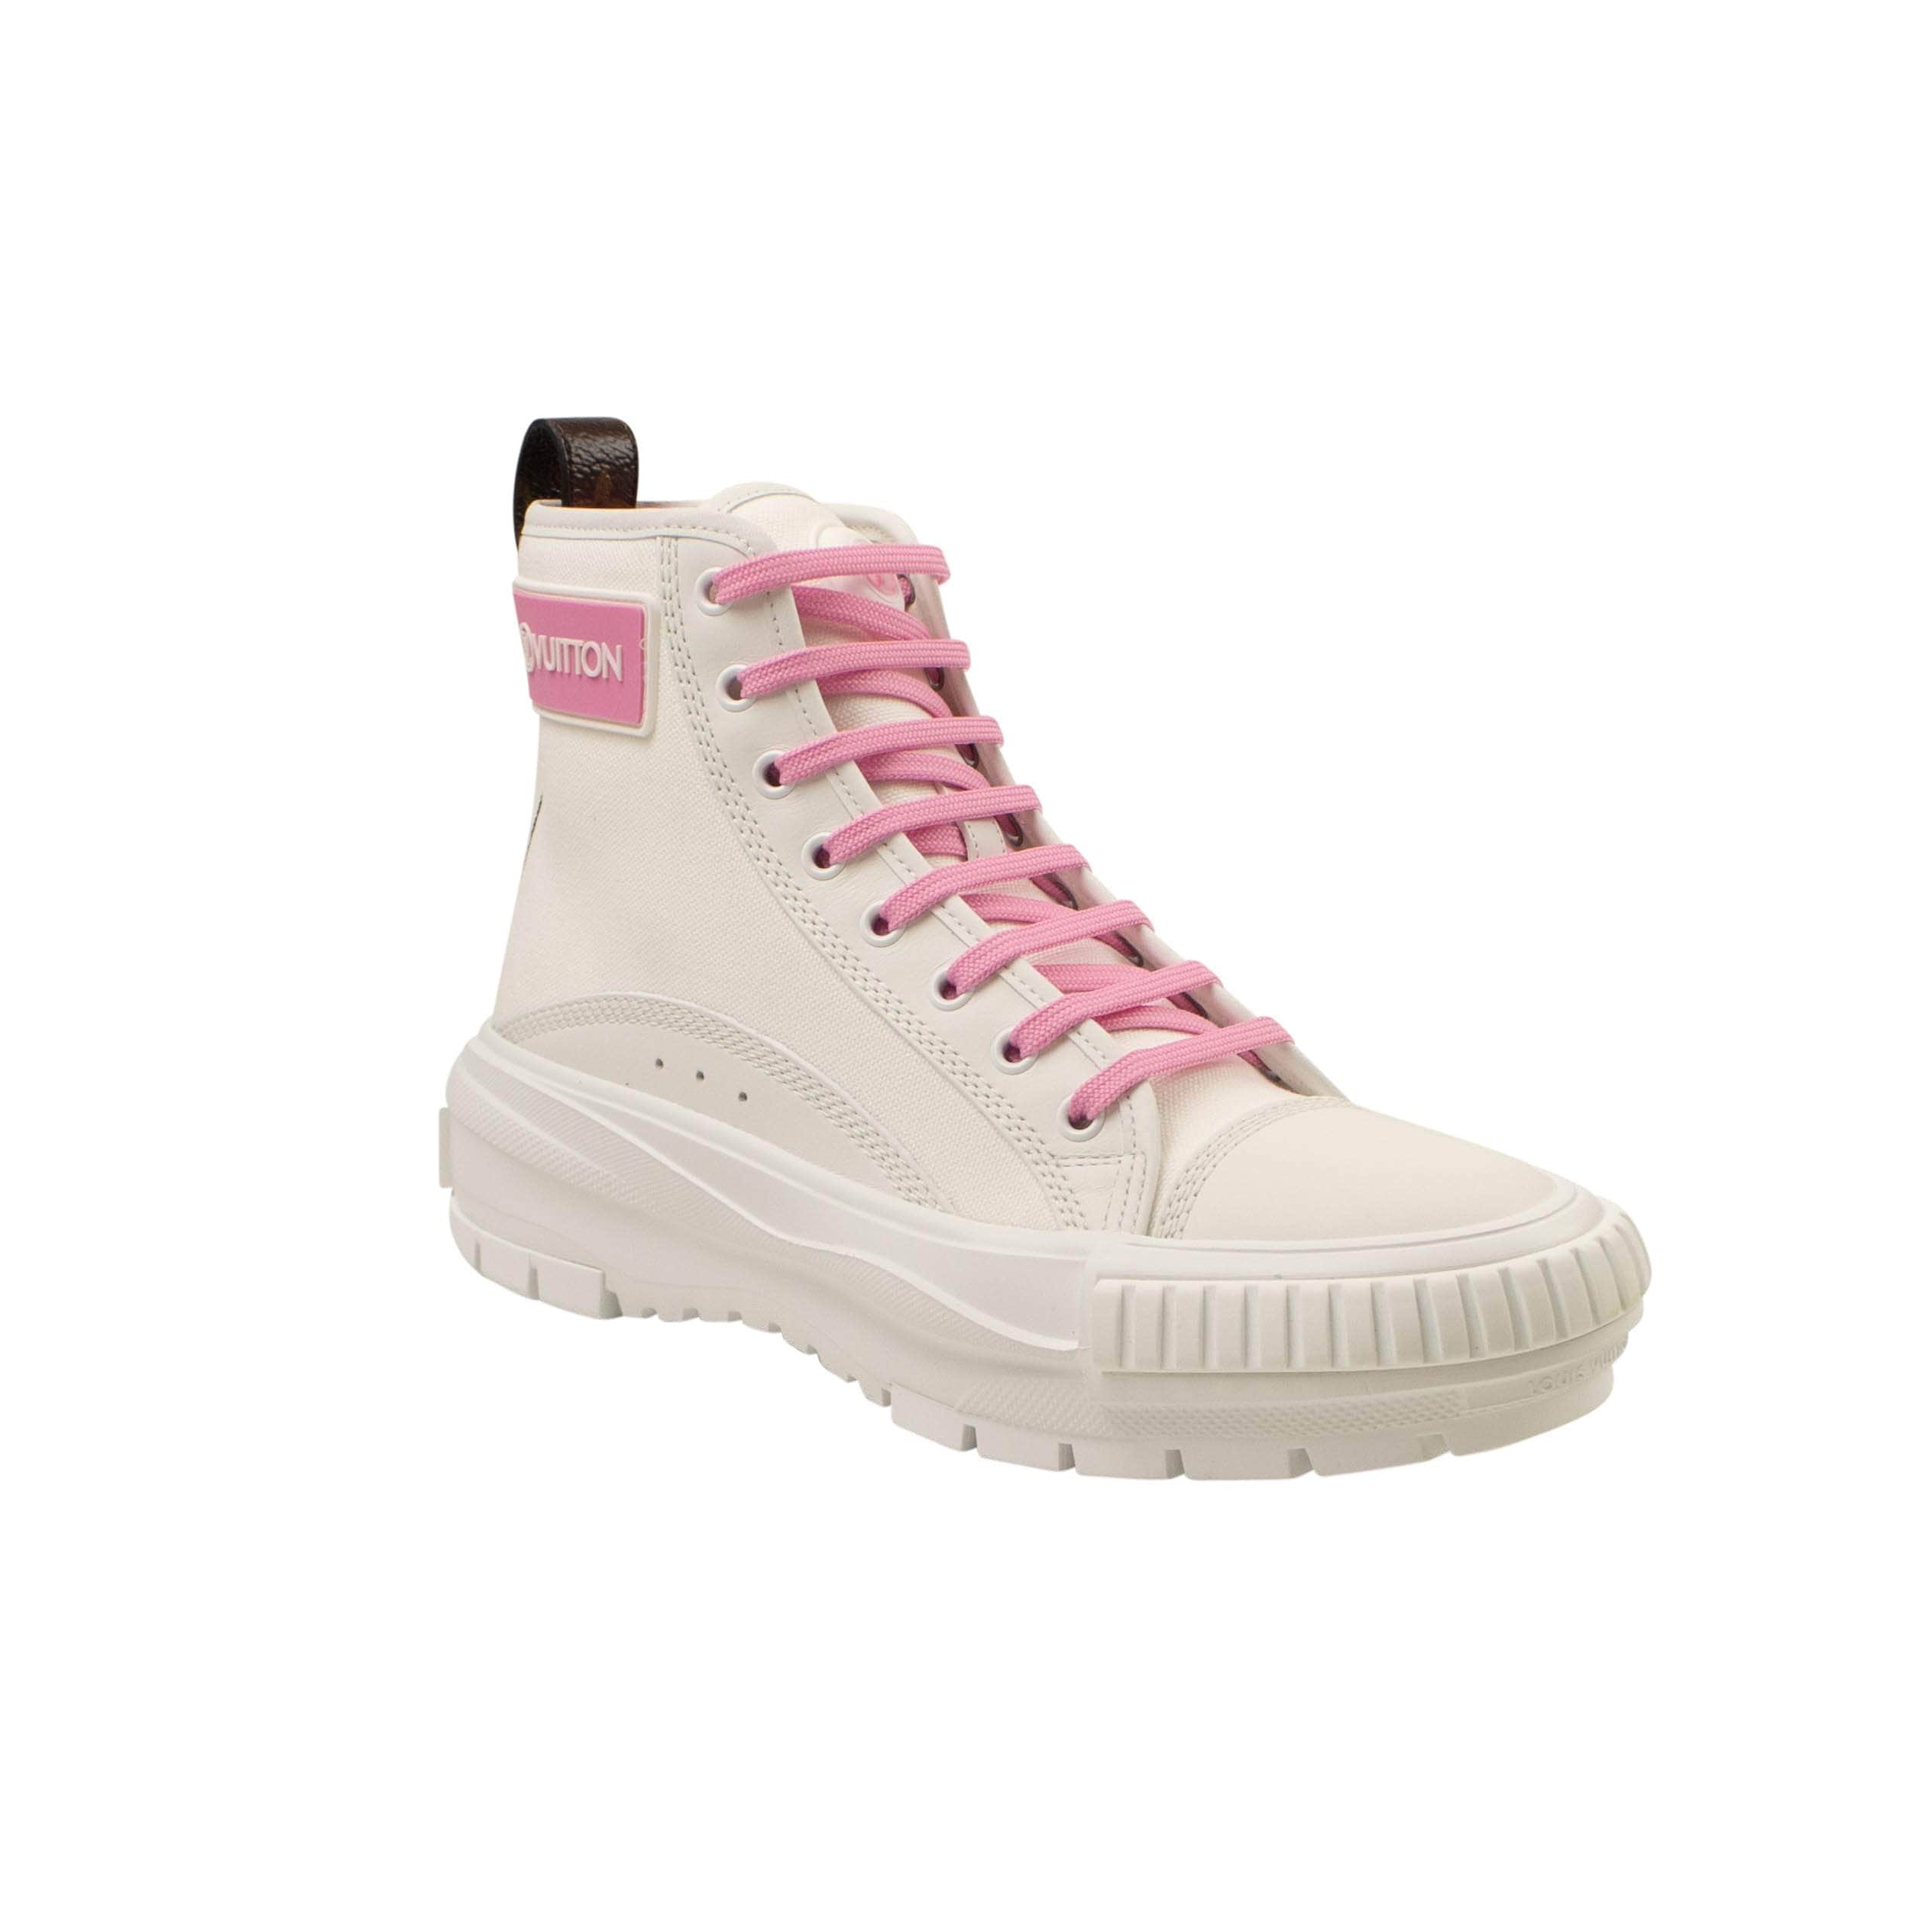 Louis Vuitton 500-750, channelenable-all, chicmi, couponcollection, gender-womens, main-shoes, size-34-5, SPO, stadiumgoods, womens-ankle-boots White Squad High Top Sneakers